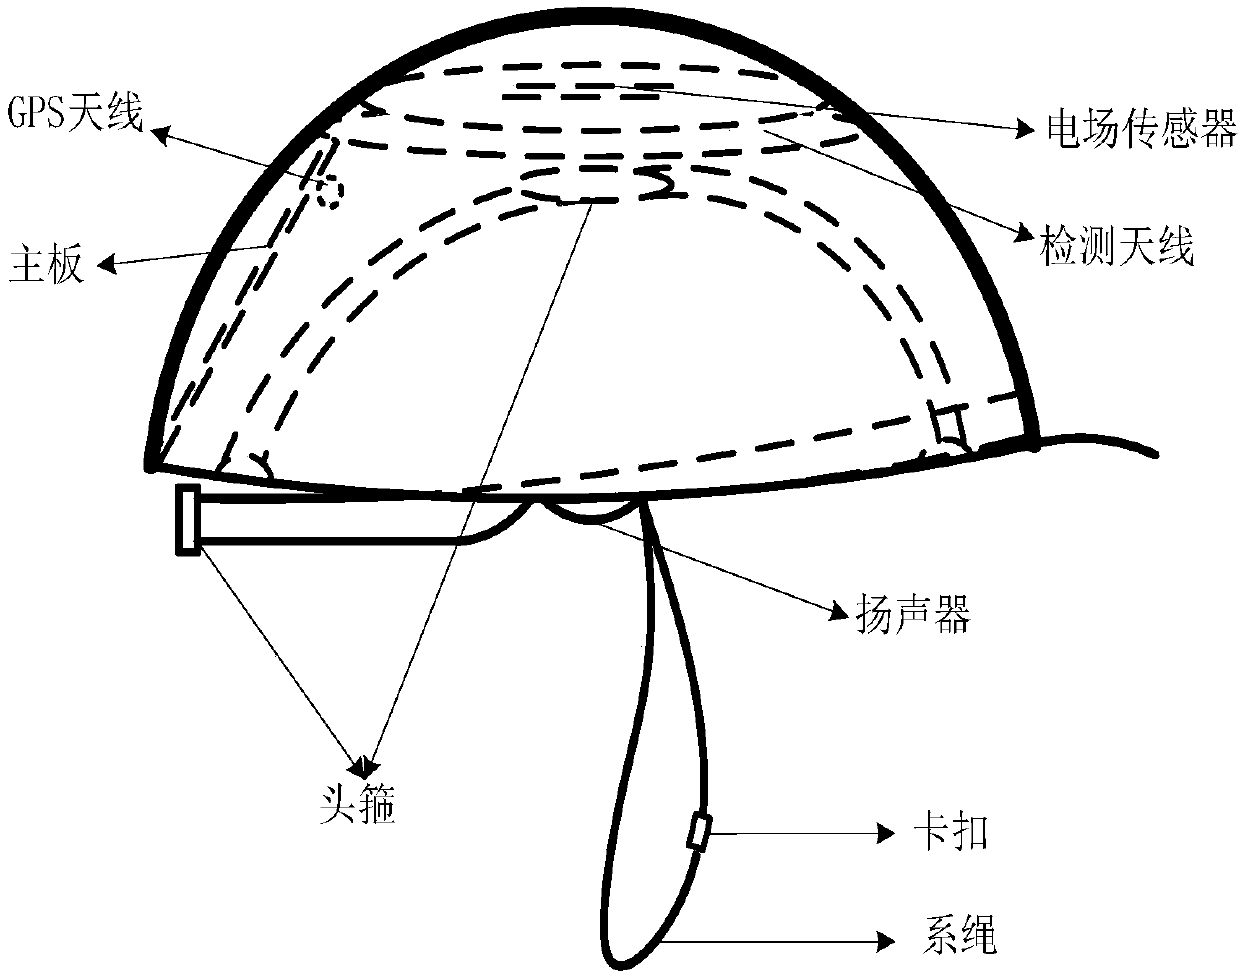 Electricity approximation alarm method, device and electricity approximation alarm smart helmet